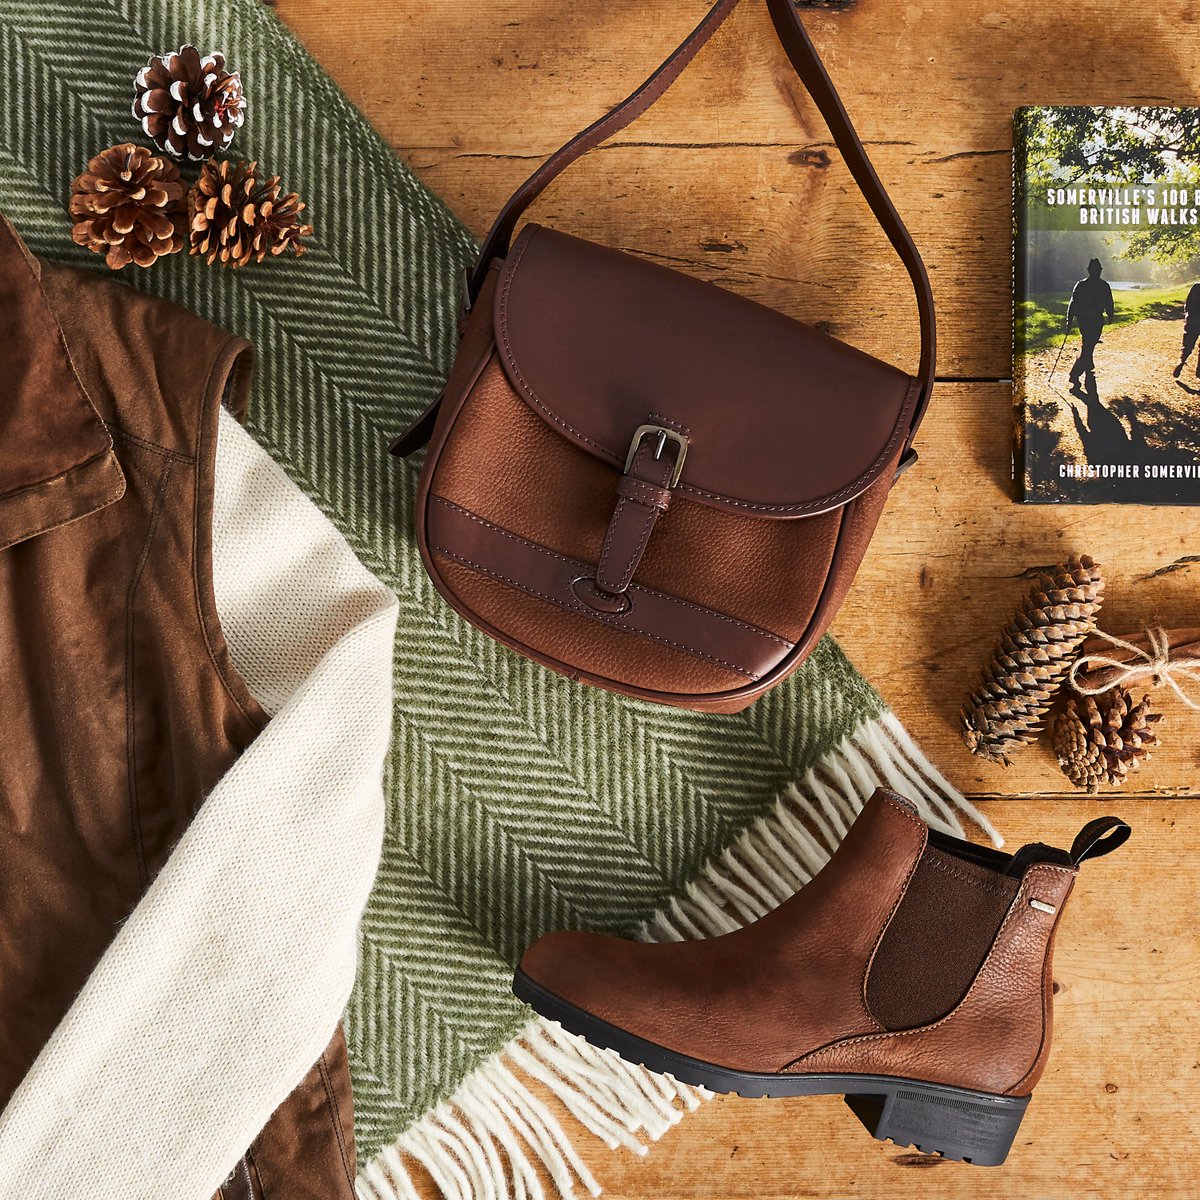 Browse the Dubarry Christmas collection online and instore. See more at dubarry.com